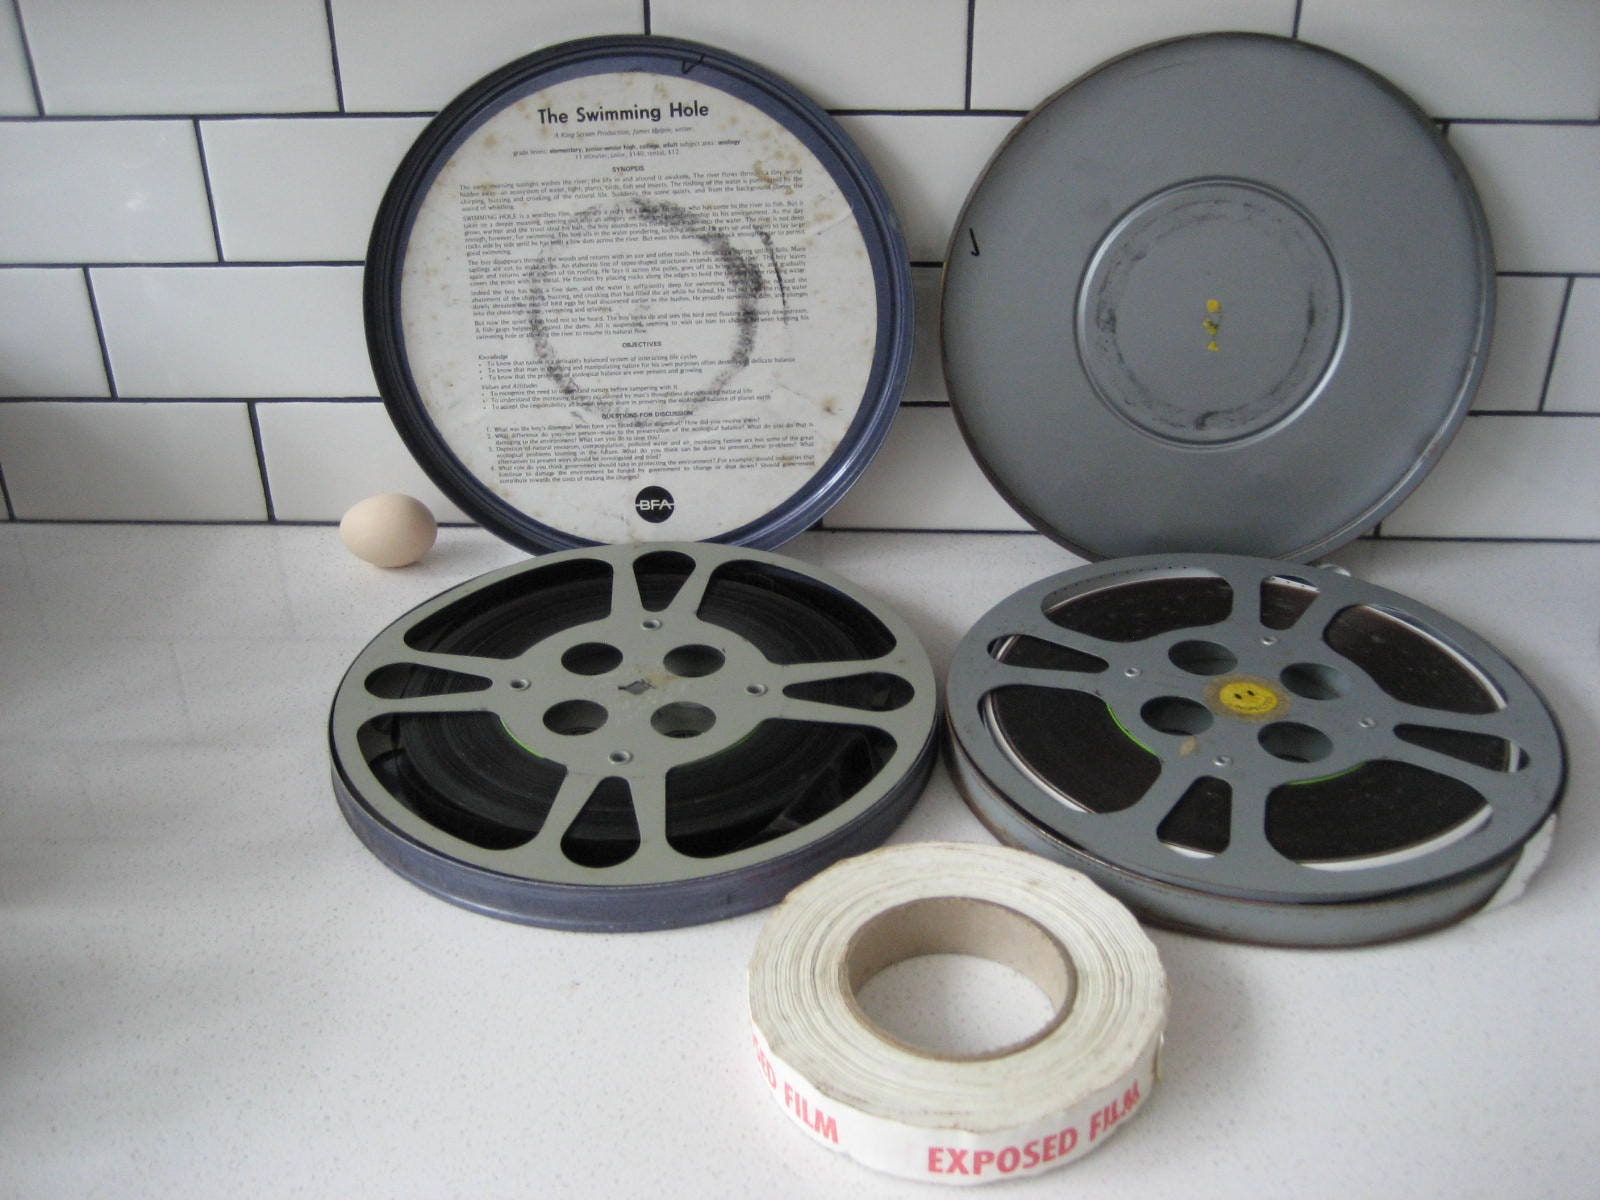 Film Reel Canister -  Canada